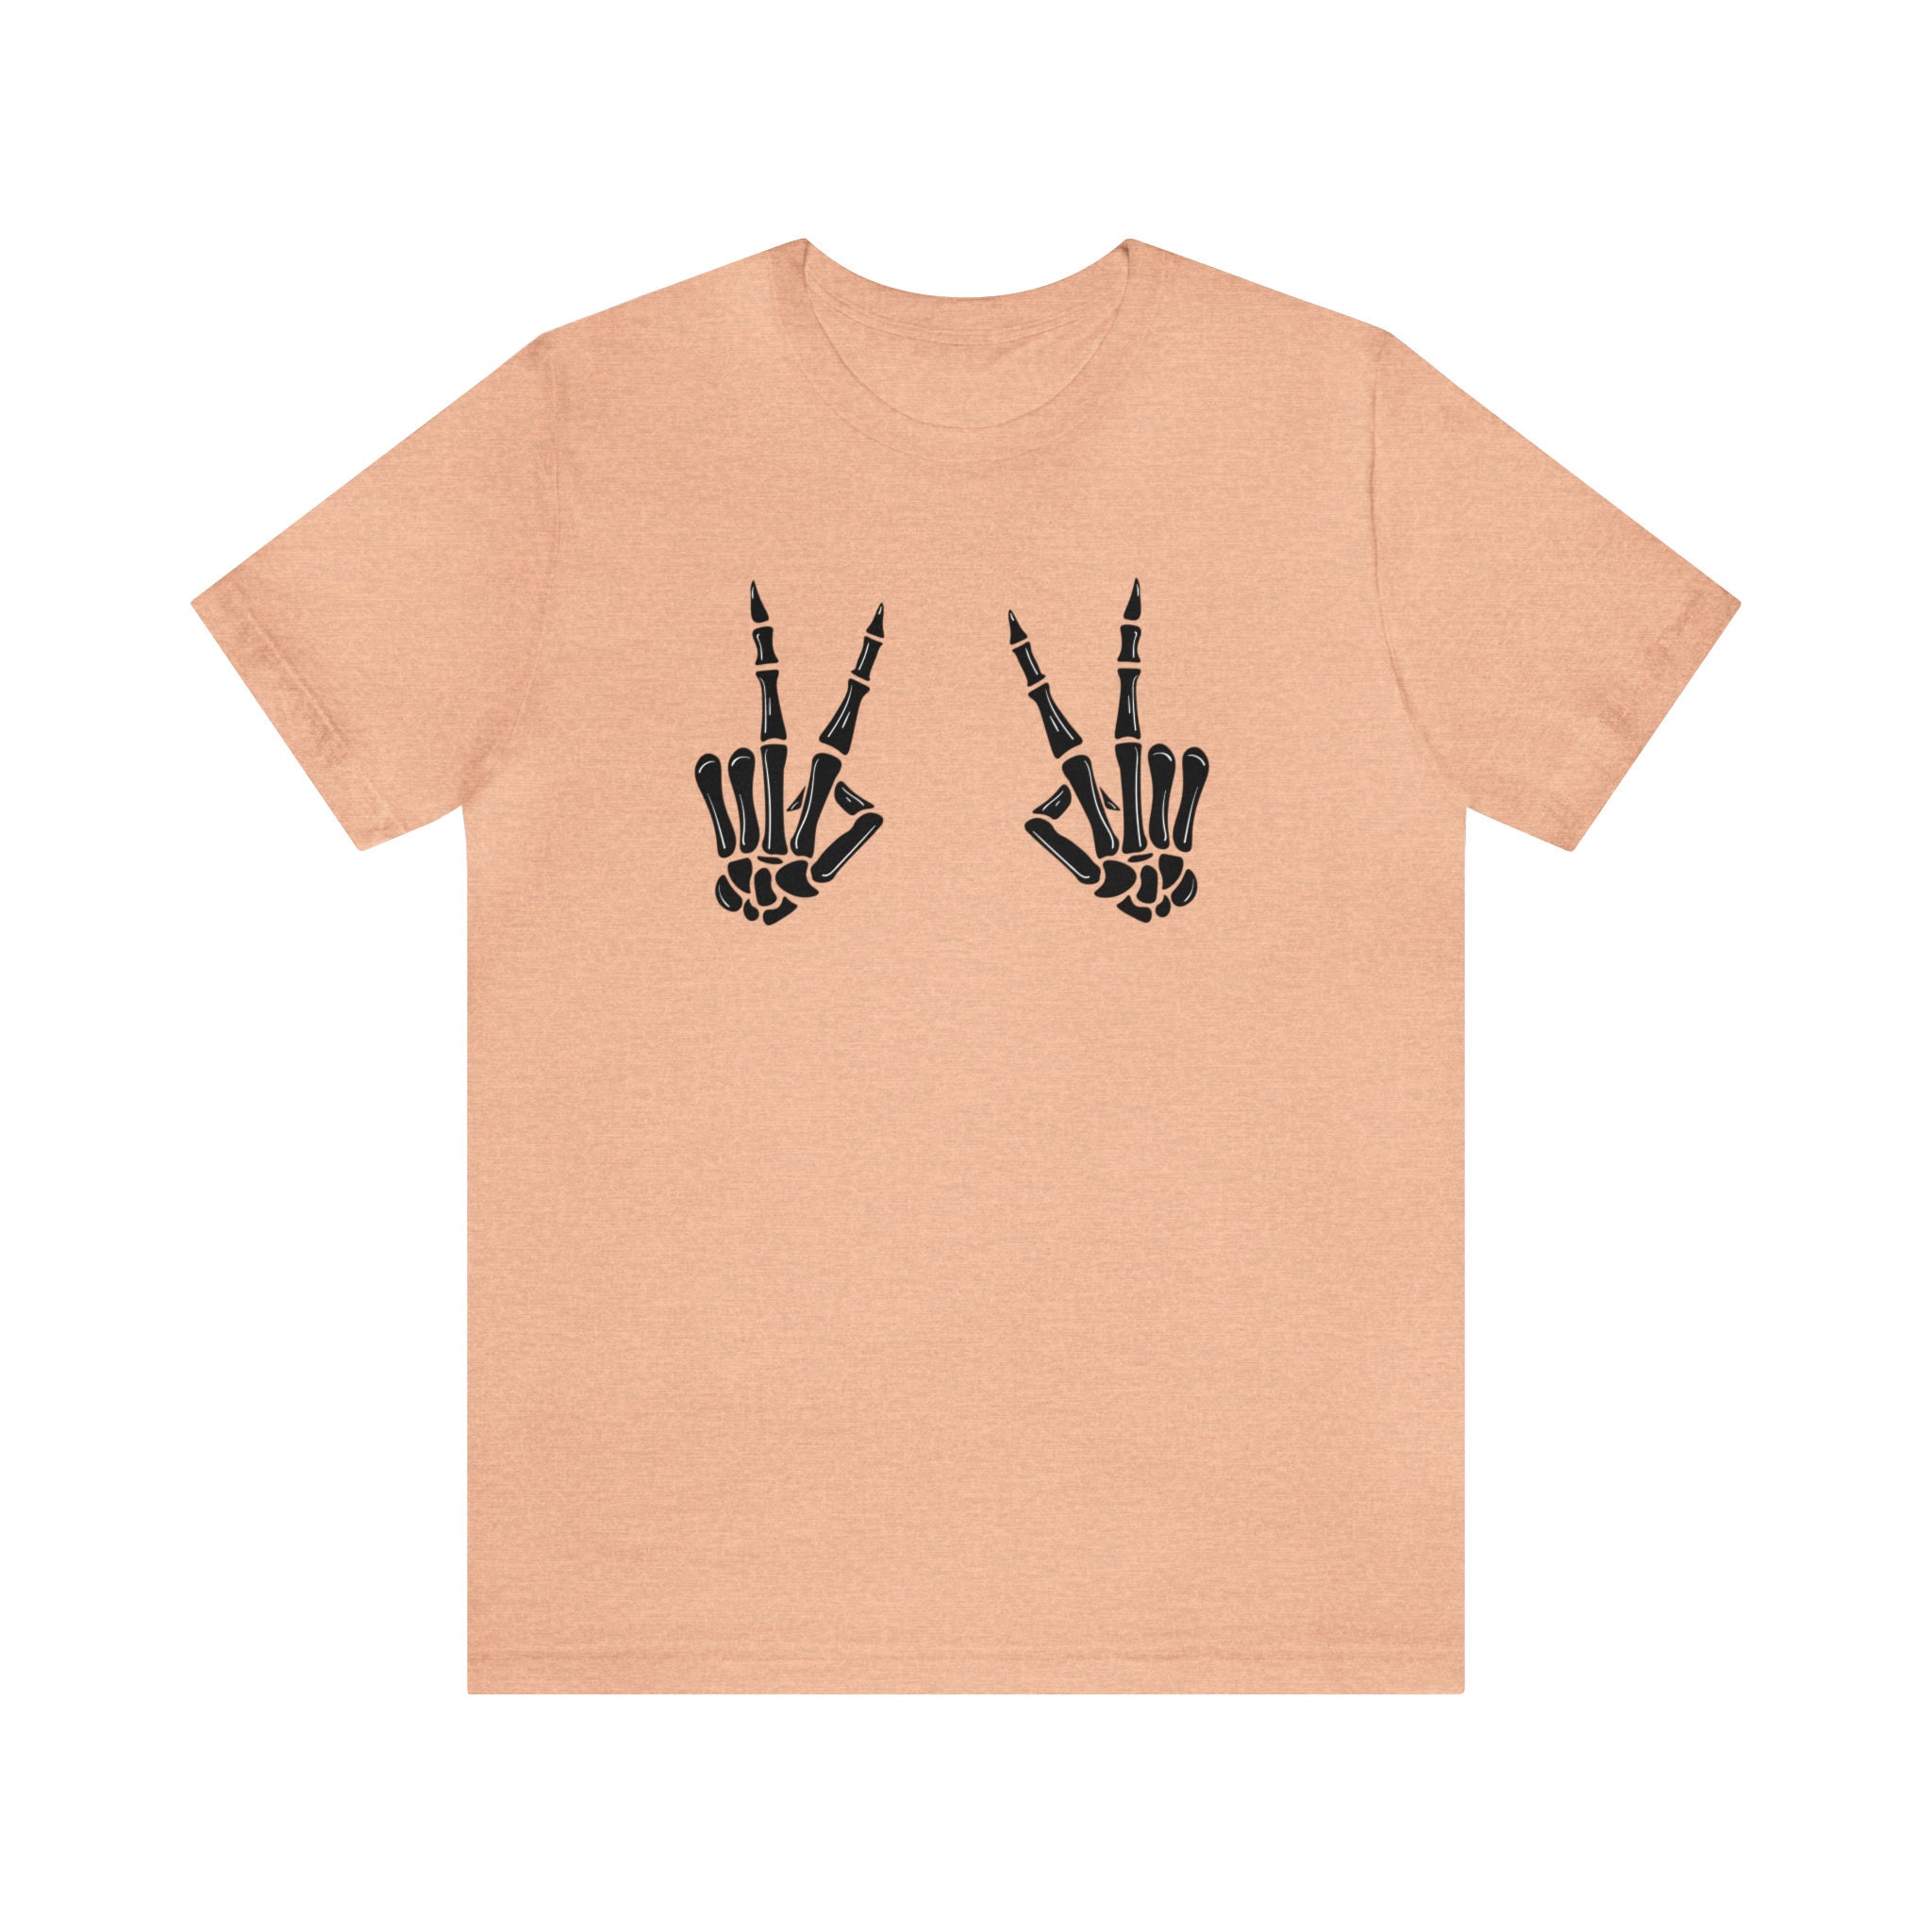 Discover Funny PEACE SIGN HANDS Shirt, Skeleton Hands Shirt, Skeleton Shirt, Peace Hand Shirt, Halloween Skeleton Shirt, Funny Shirt